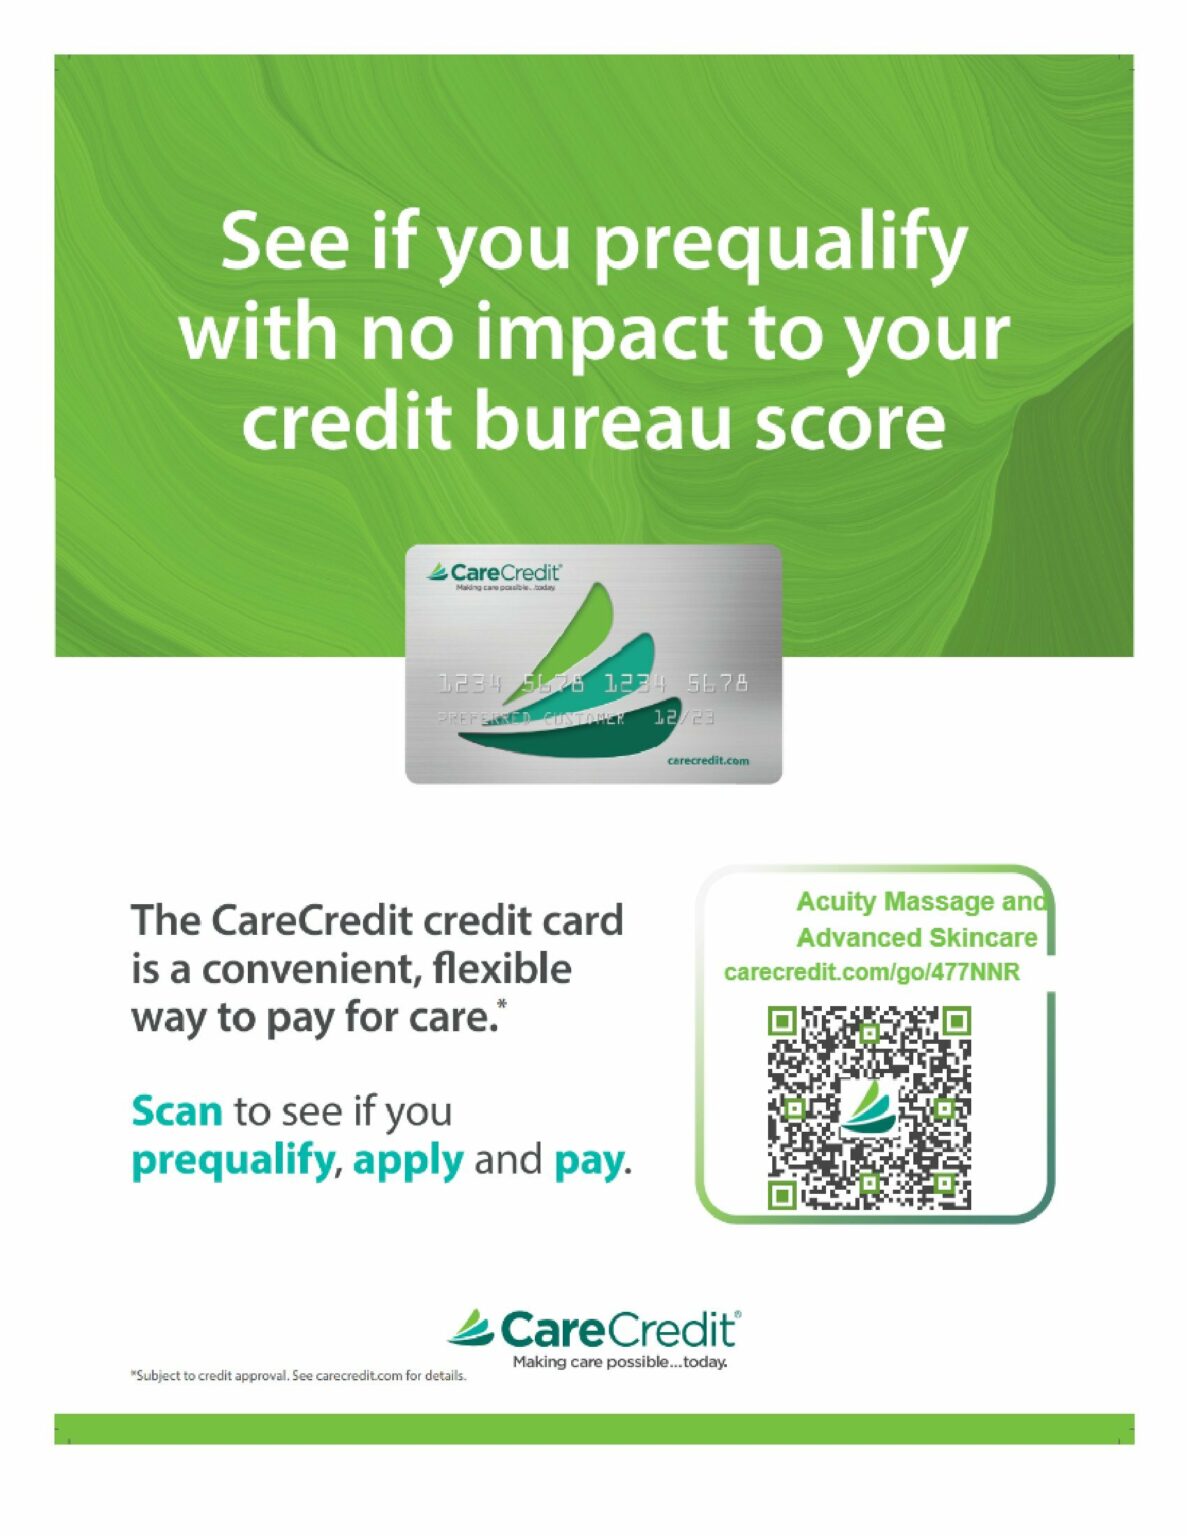 Not only do we have Care Credit, Allegro has a special rate promotion at www.allegro.com